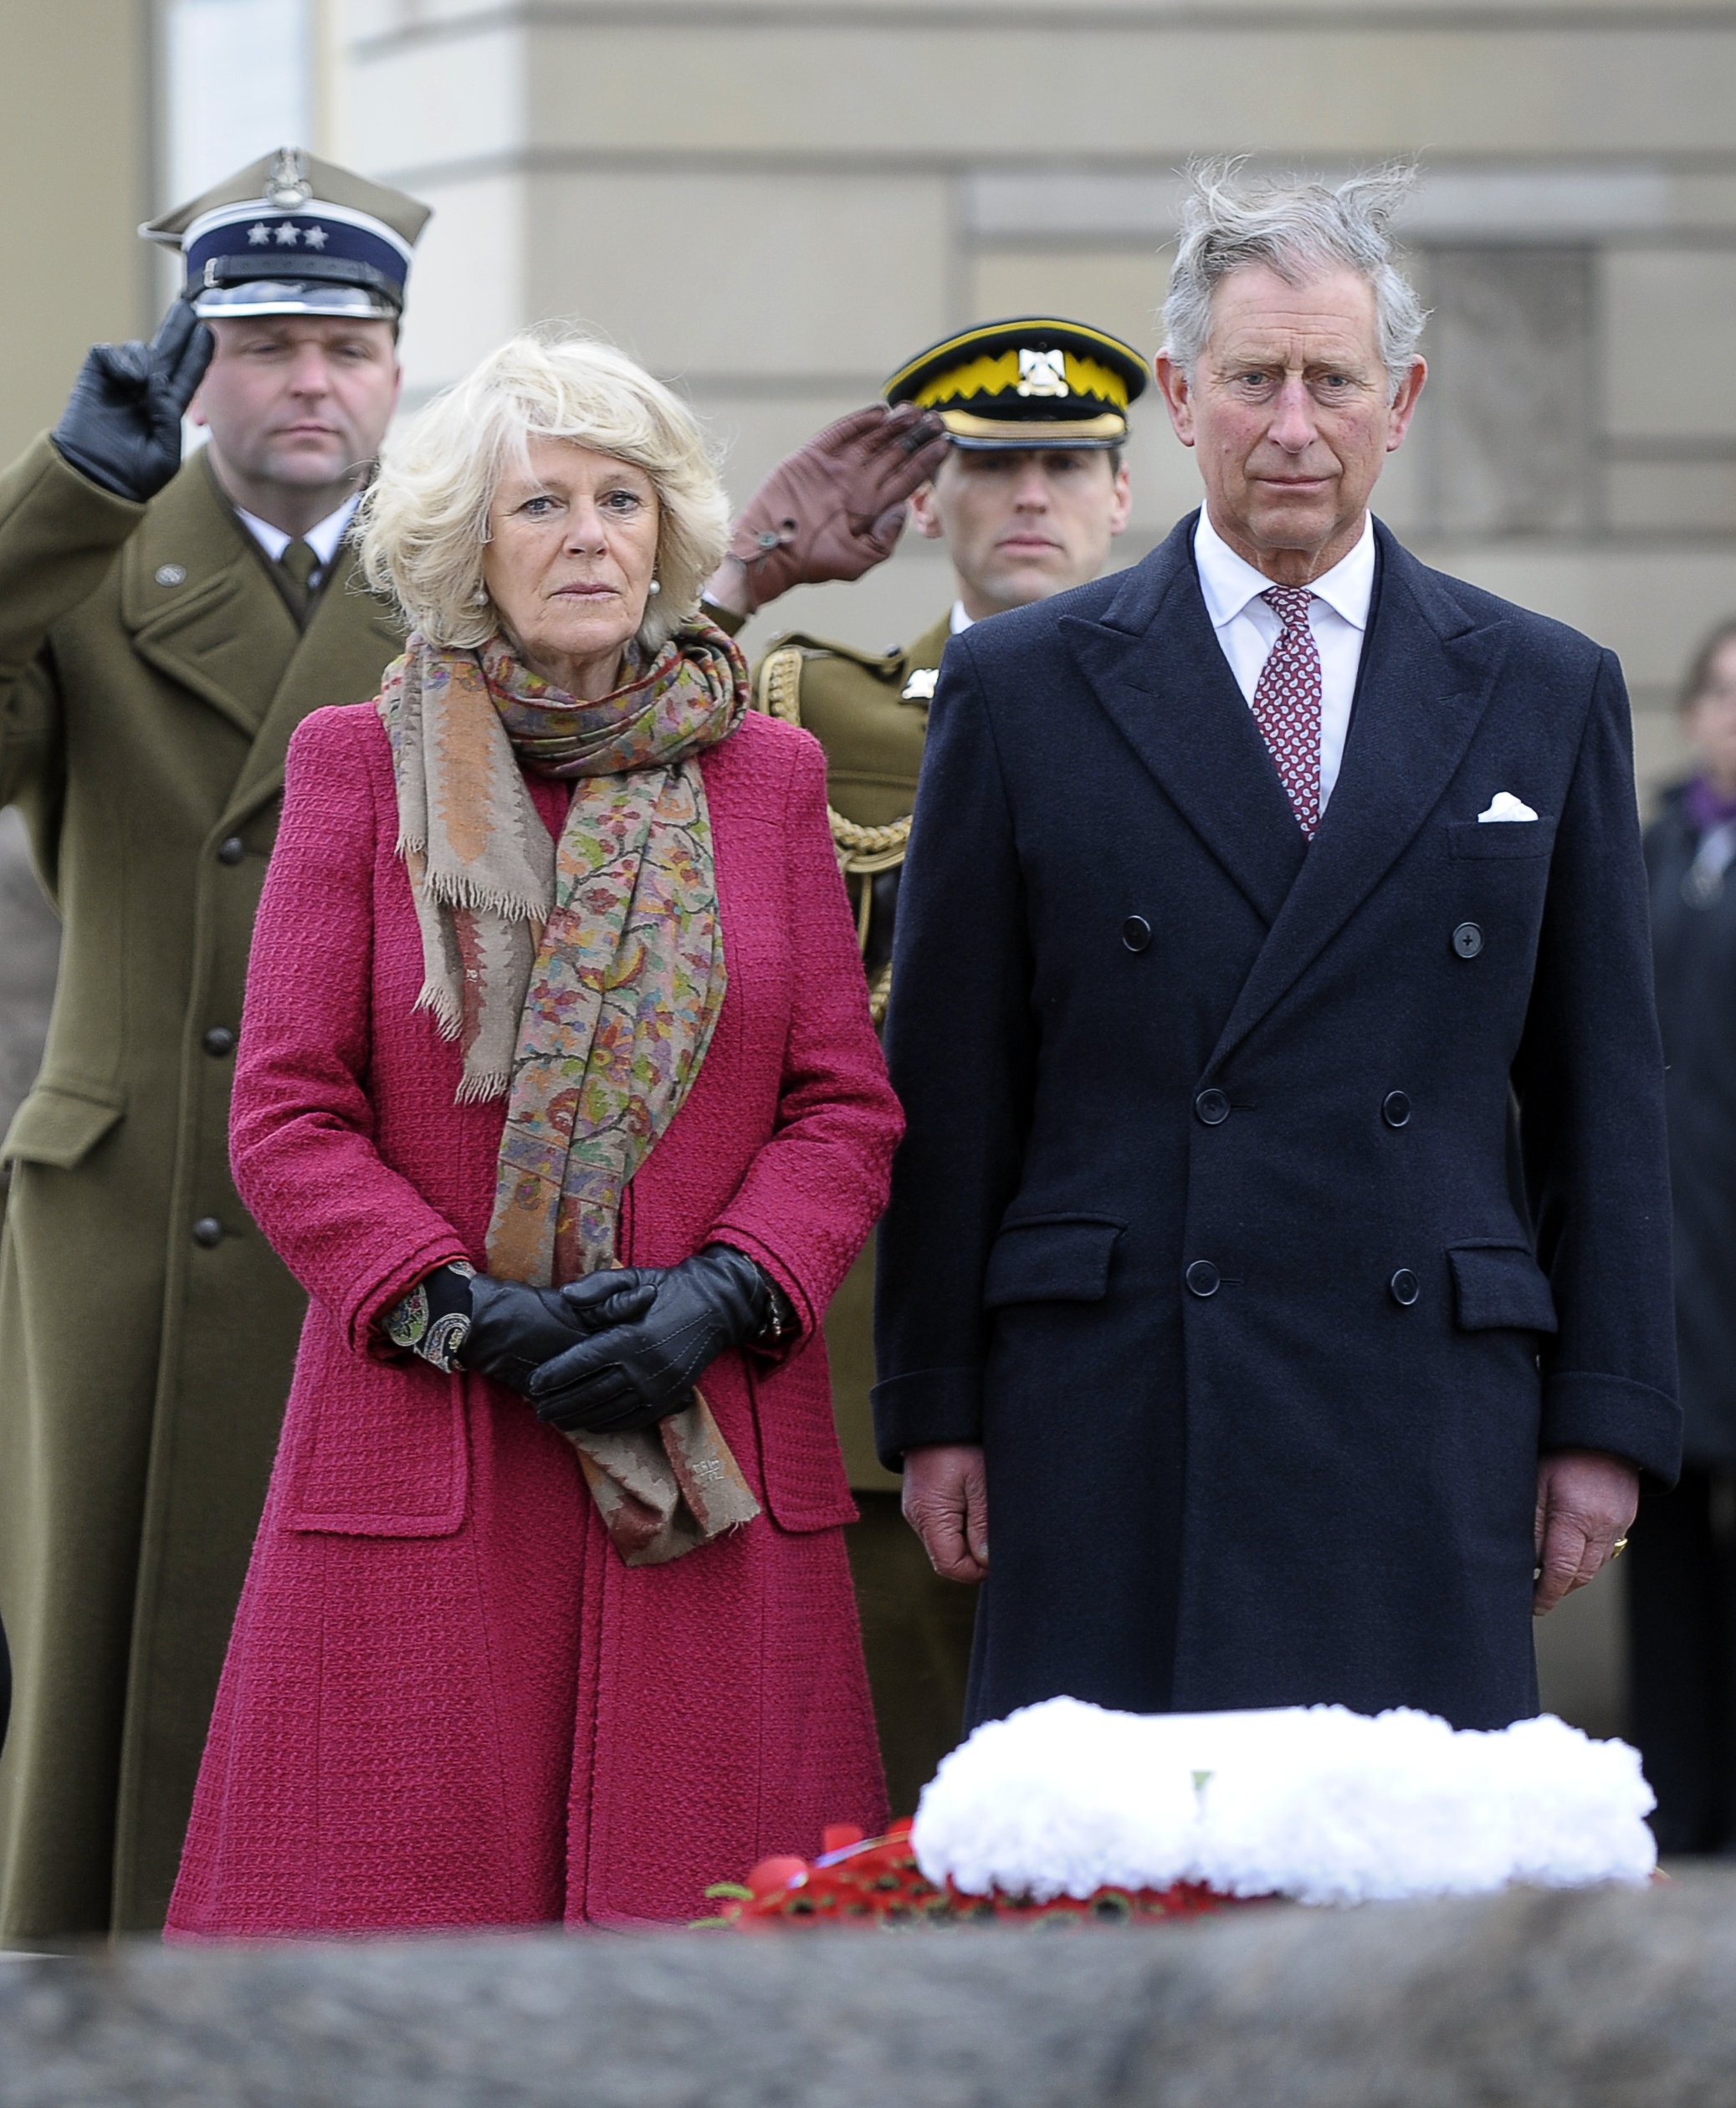 Duchess Camilla and Prince Charles at the grave of priest Jerzy Popieluszko on March 15, 2010, in Warsaw. | Source: Getty Images